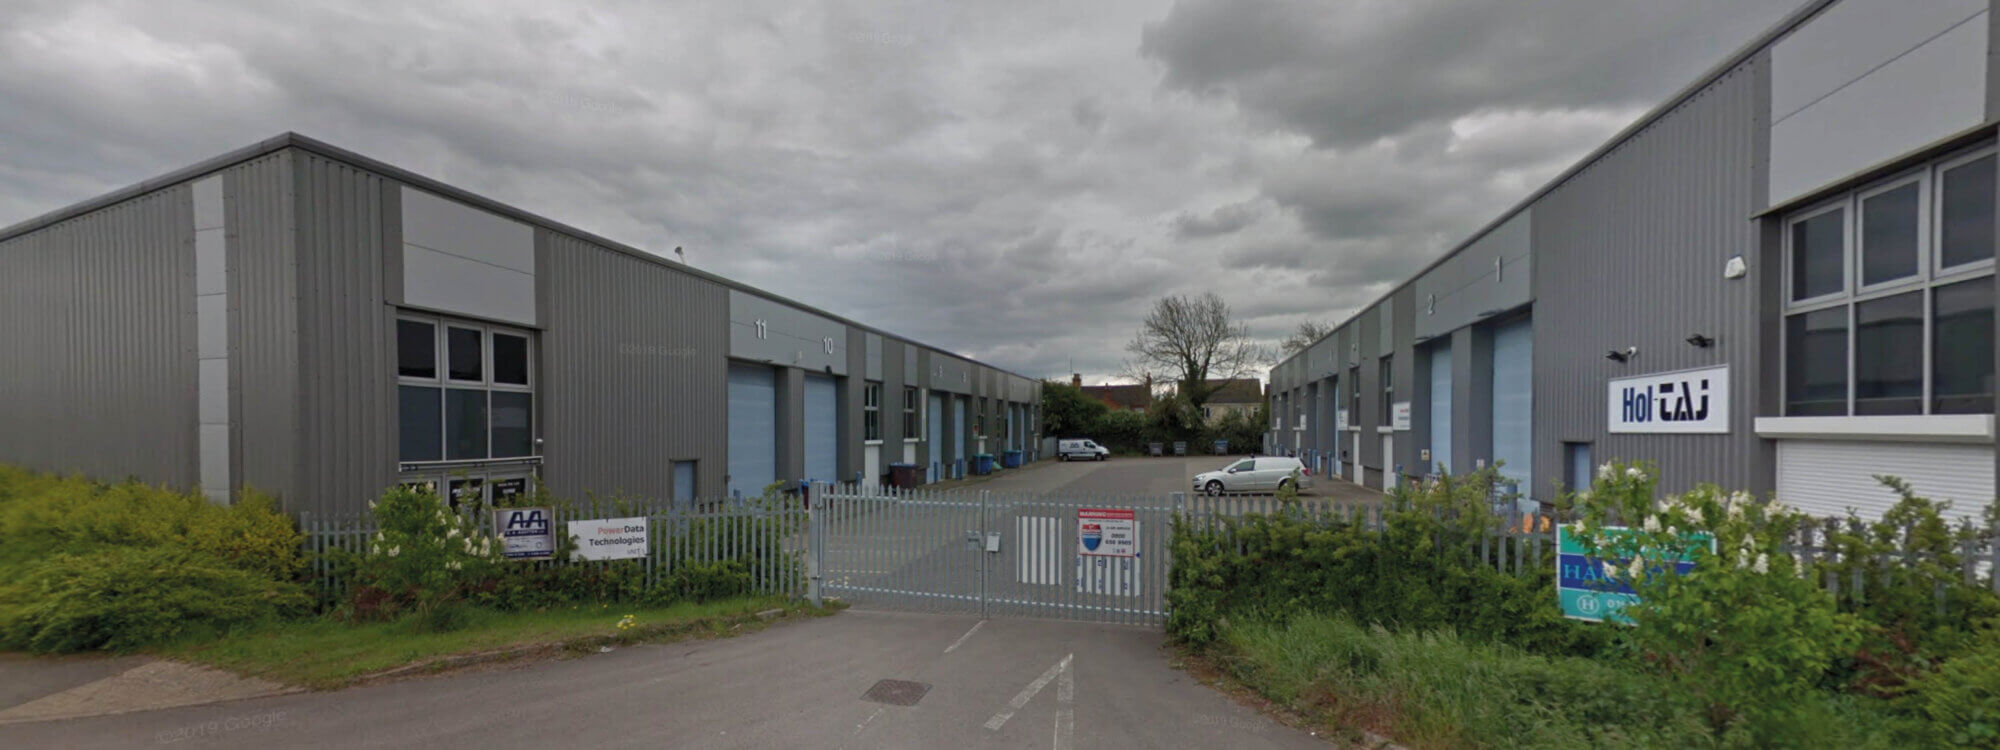 Scott Bader further invests in Northamptonshire with new adhesive facility